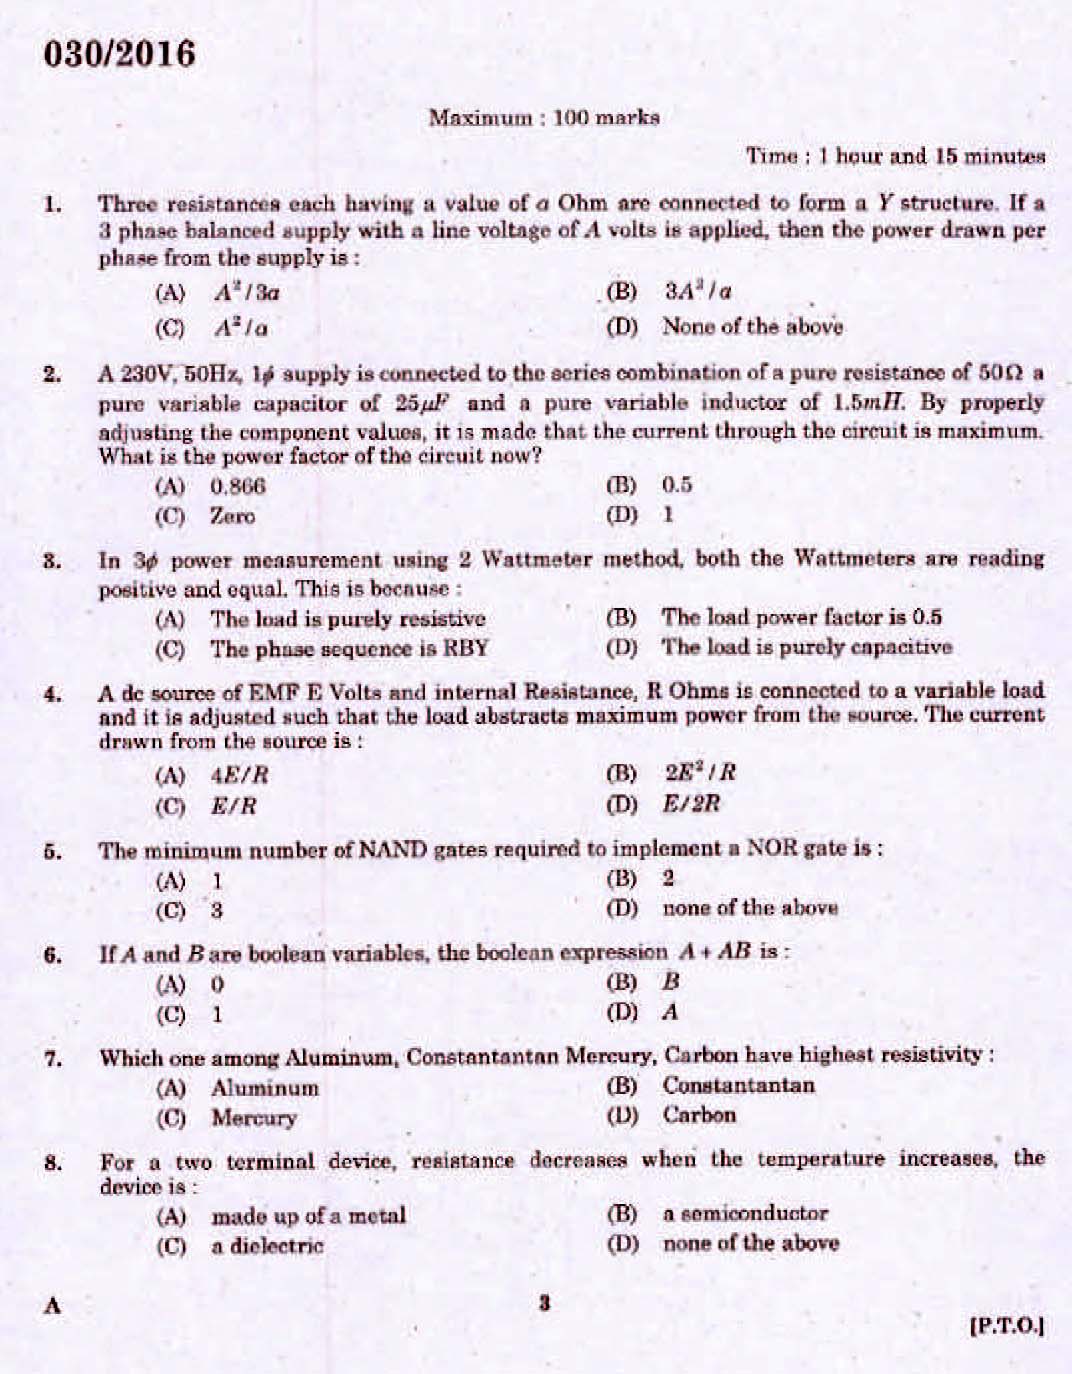 Kerala PSC Assistant Engineer Electrical Exam 2016 Question Paper Code 0302016 1